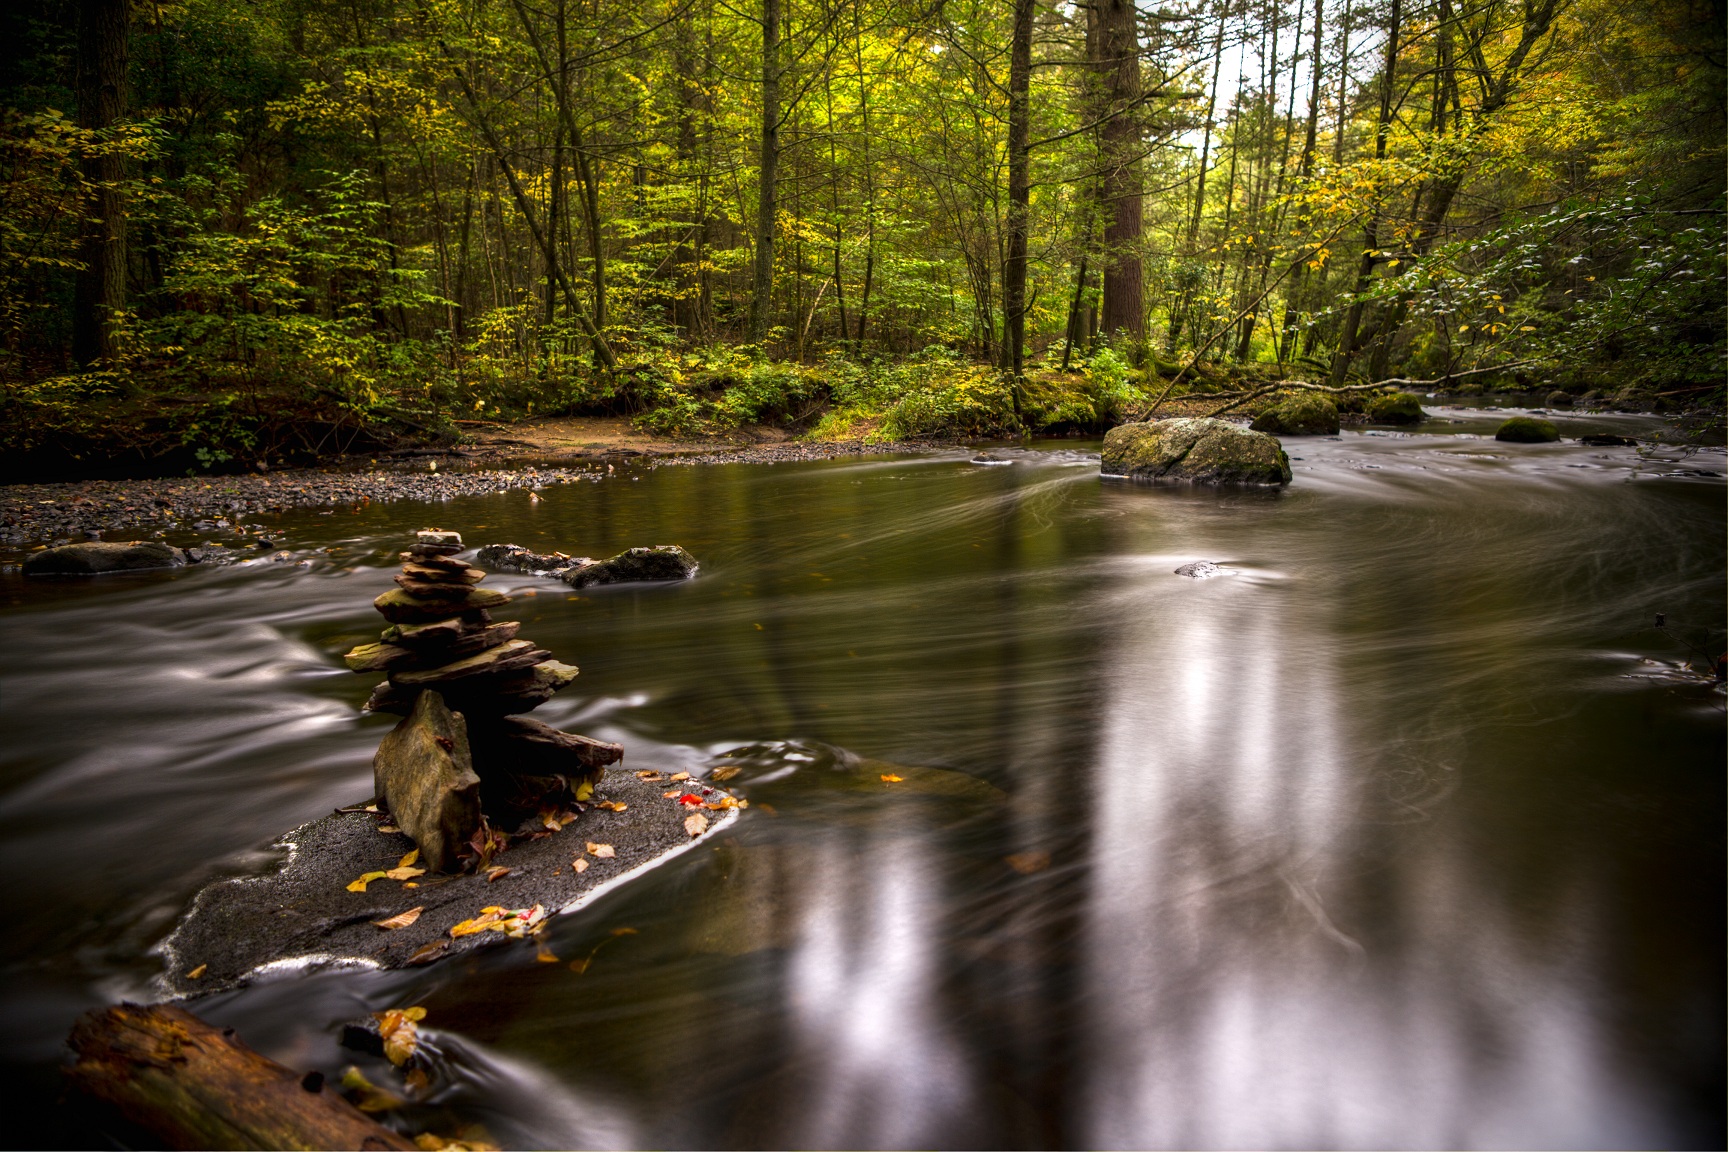 Slow Exposure Stream, Devils Hopyard State Park (user submitted)